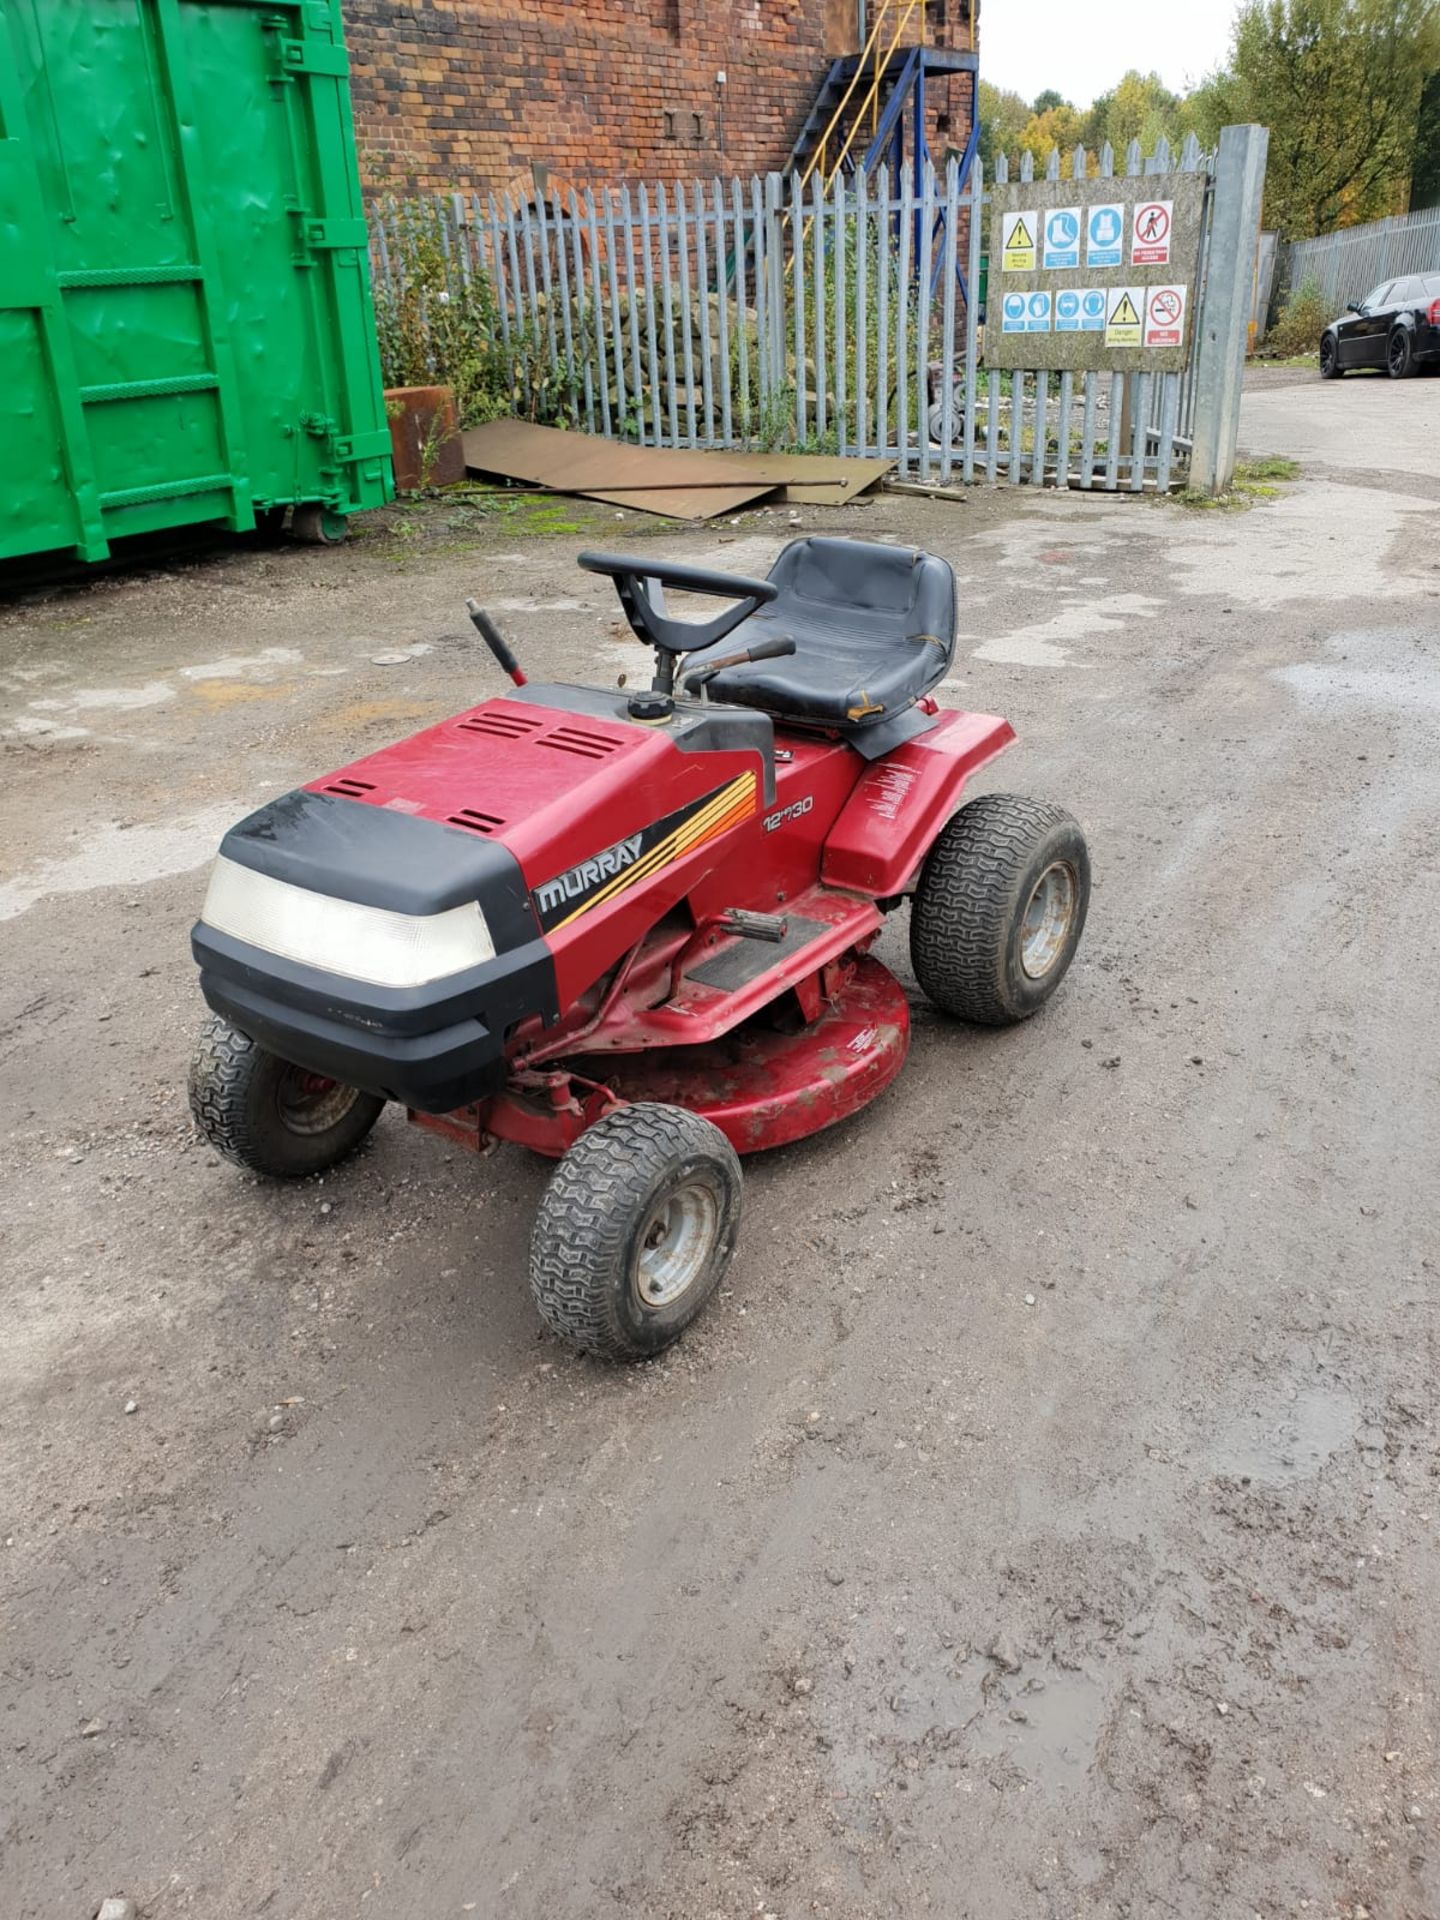 MURRAY 12HP/30 RIDE ON LAWN MOWER, FULL WORKING ORDER, PETROL ENGINE *NO VAT* - Image 2 of 5